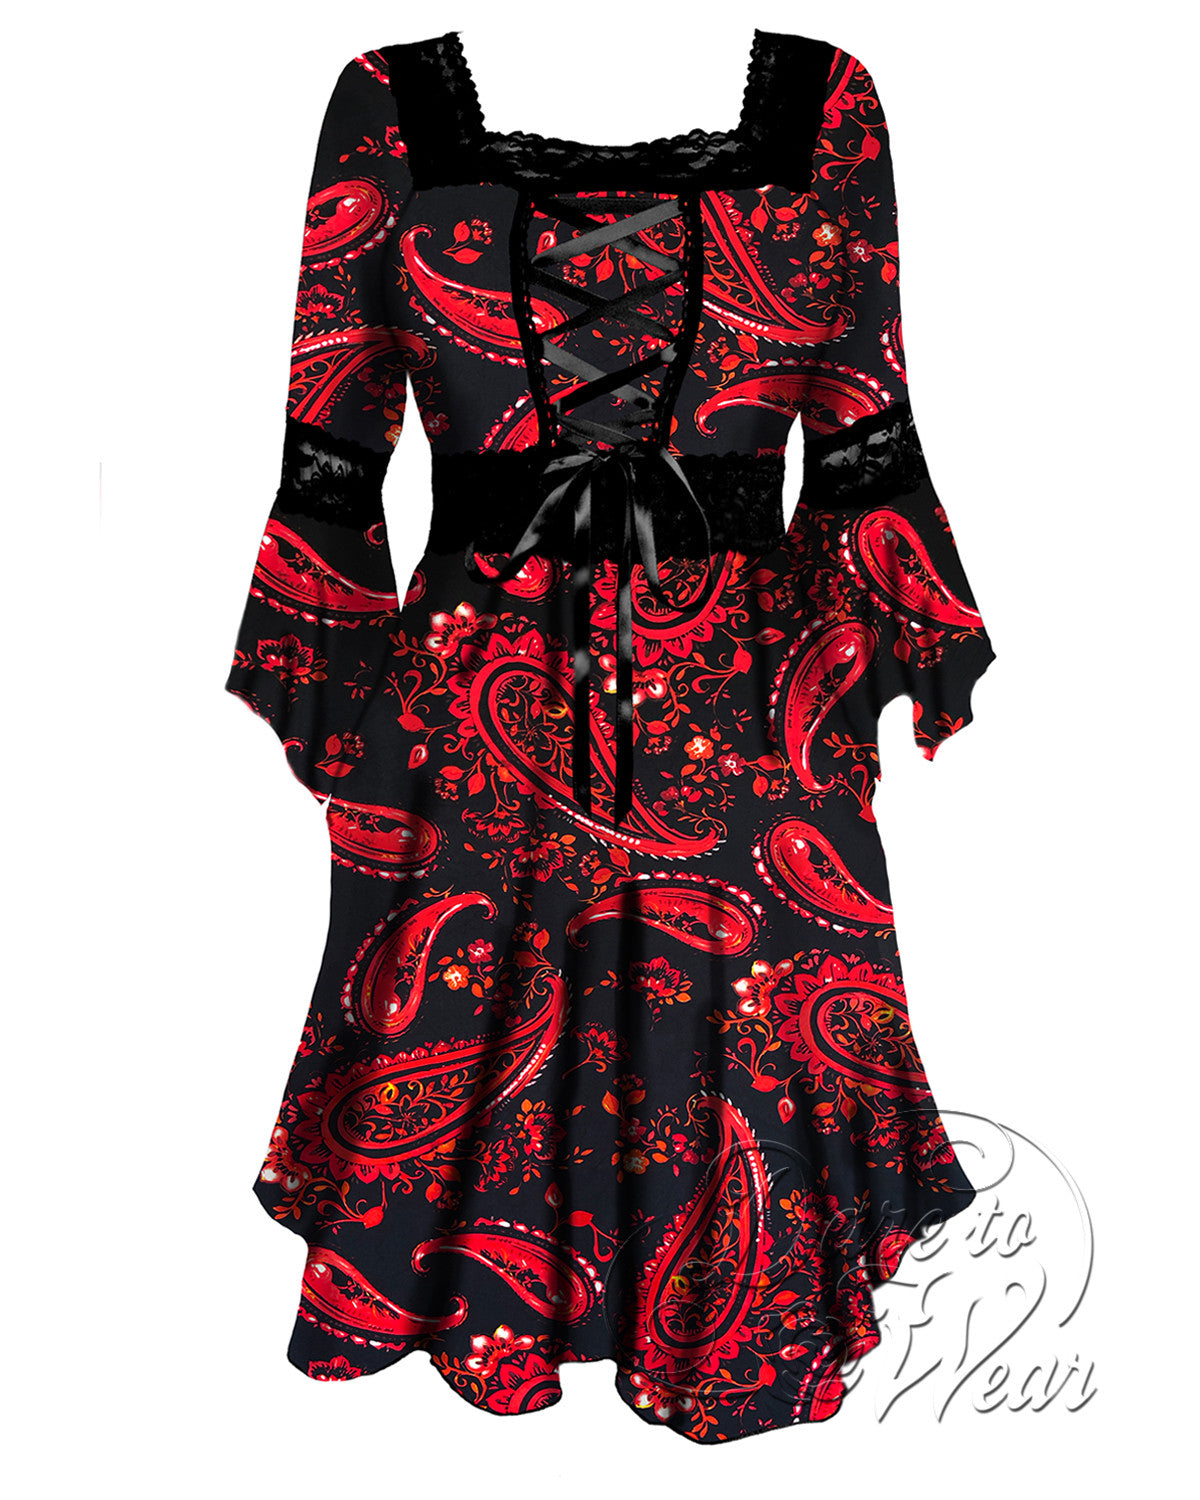 Renaissance Dress in Firefly  Paisley Fire Dragon Gothic Corset